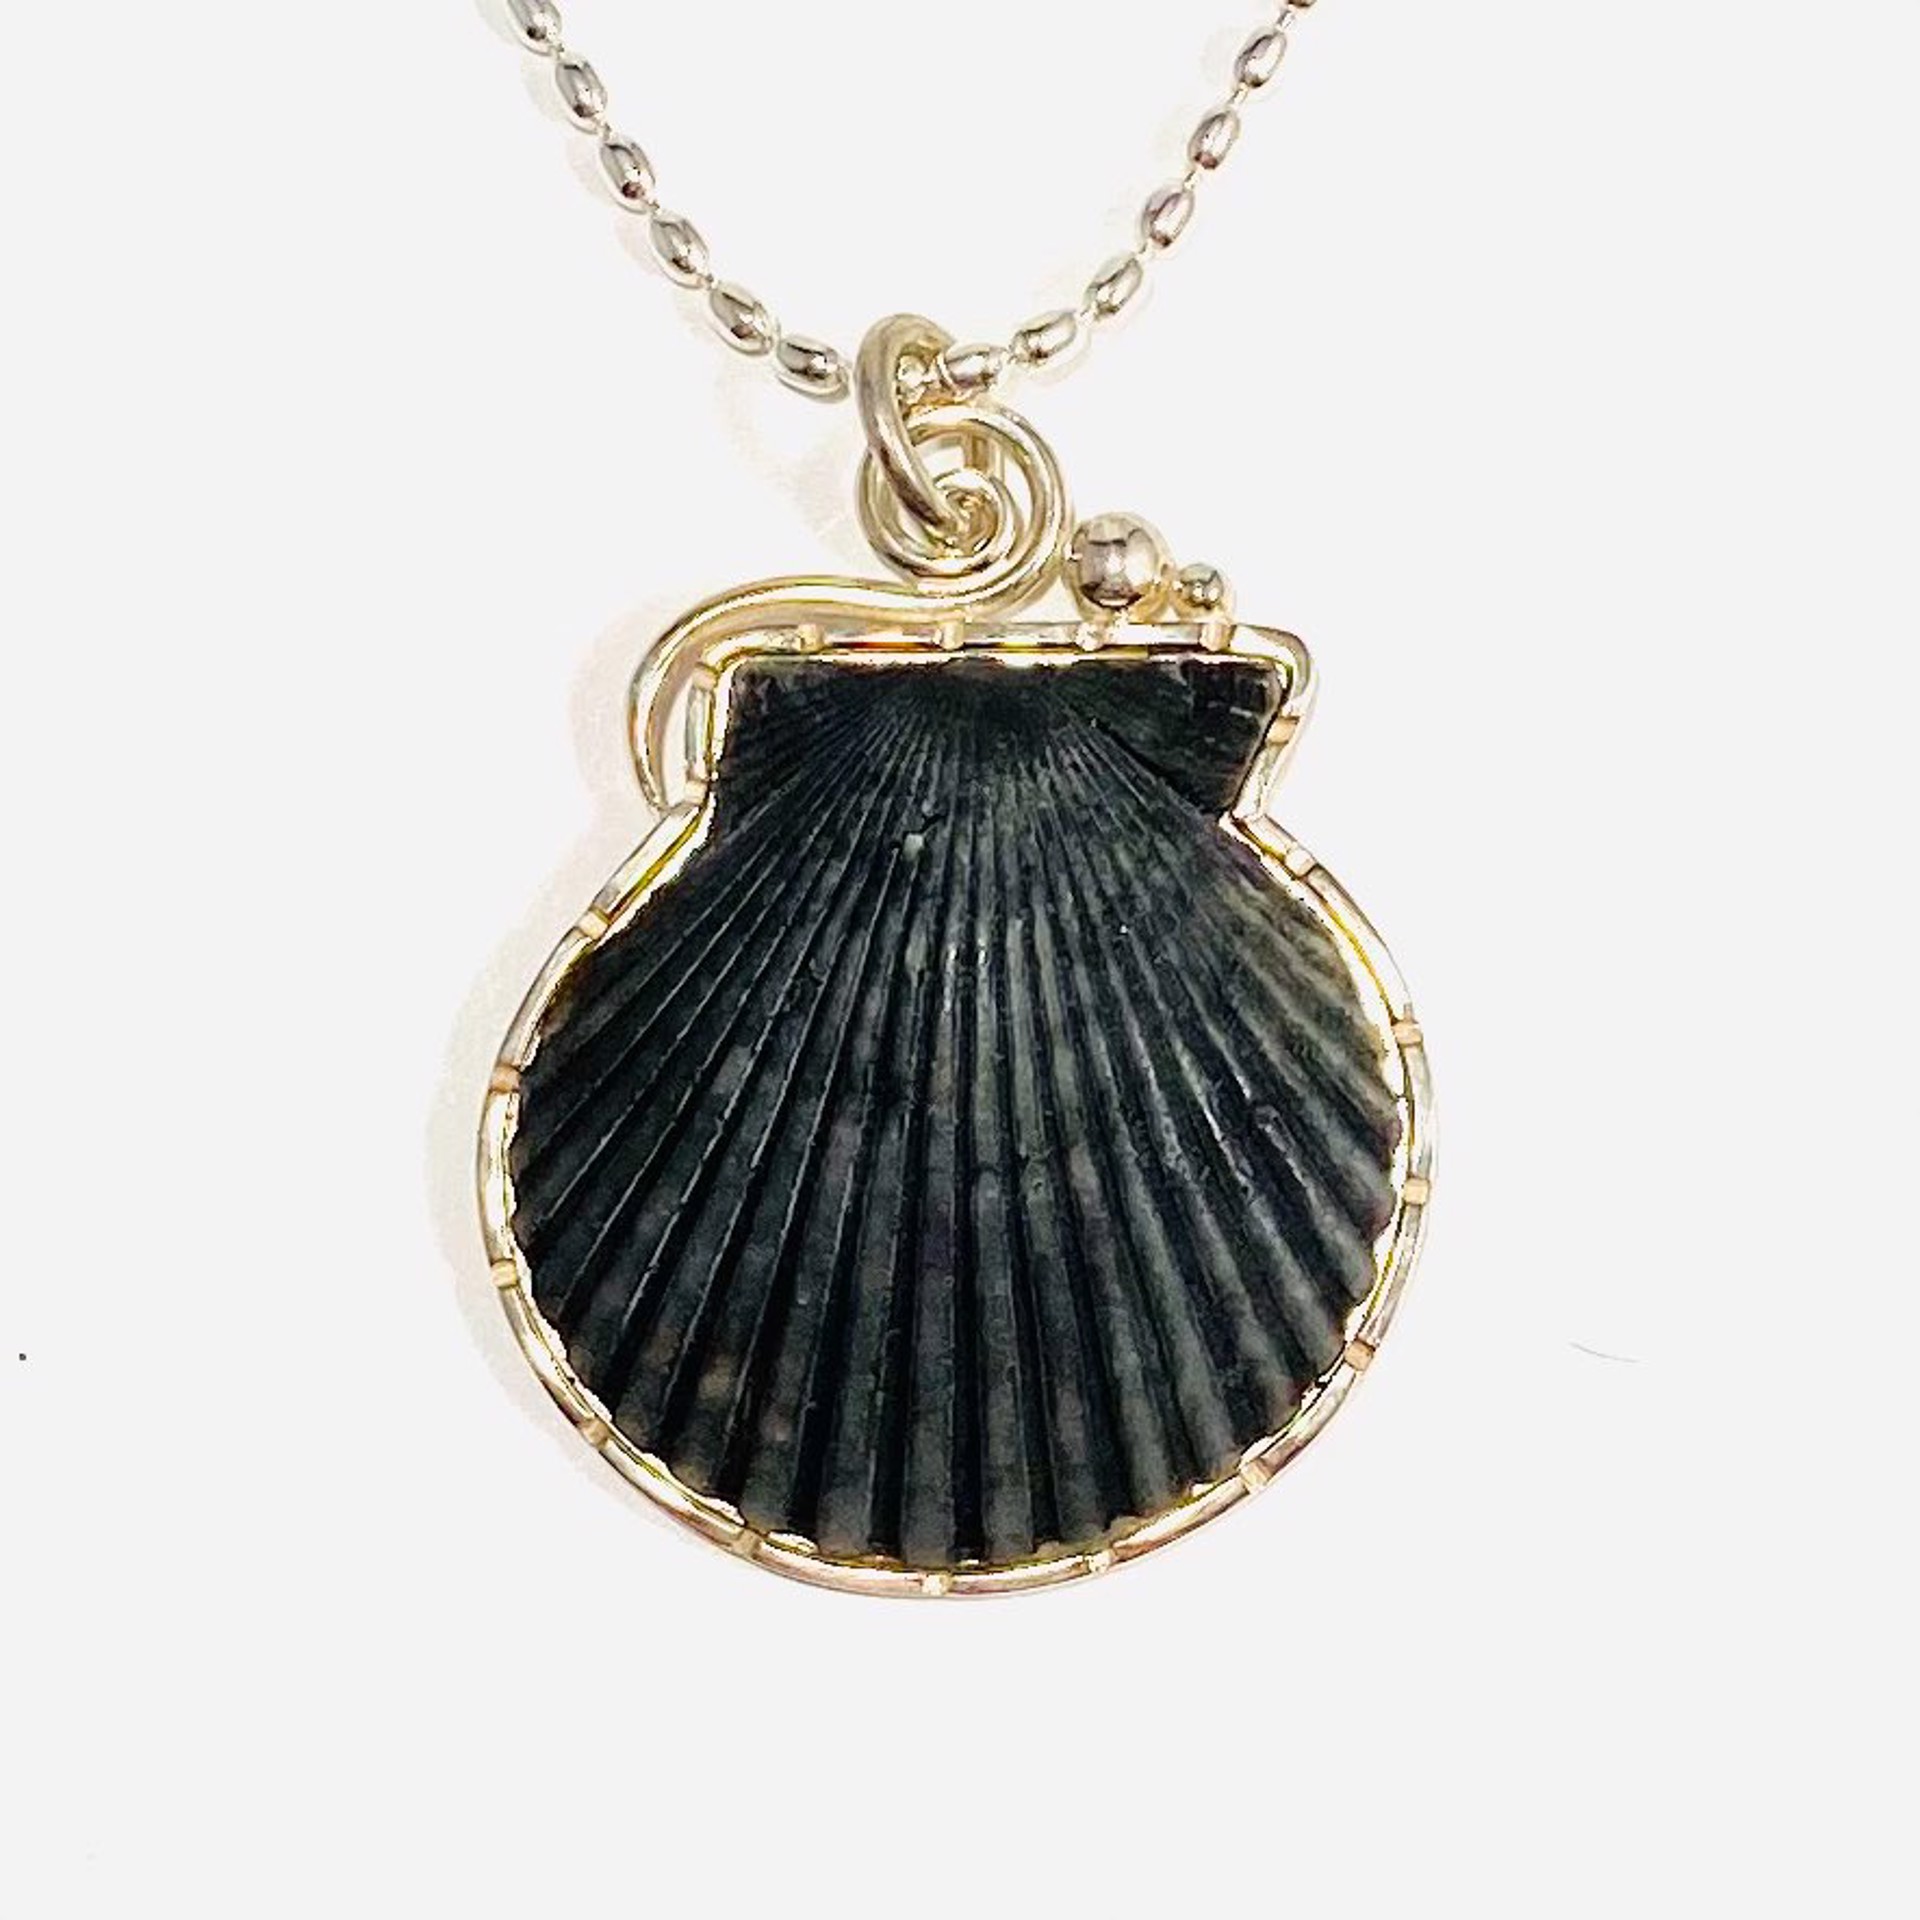 BU22-7 Black Scallop Shell "Wave" Pendant on Silver Rice Chain Necklace by Barbara Umbel